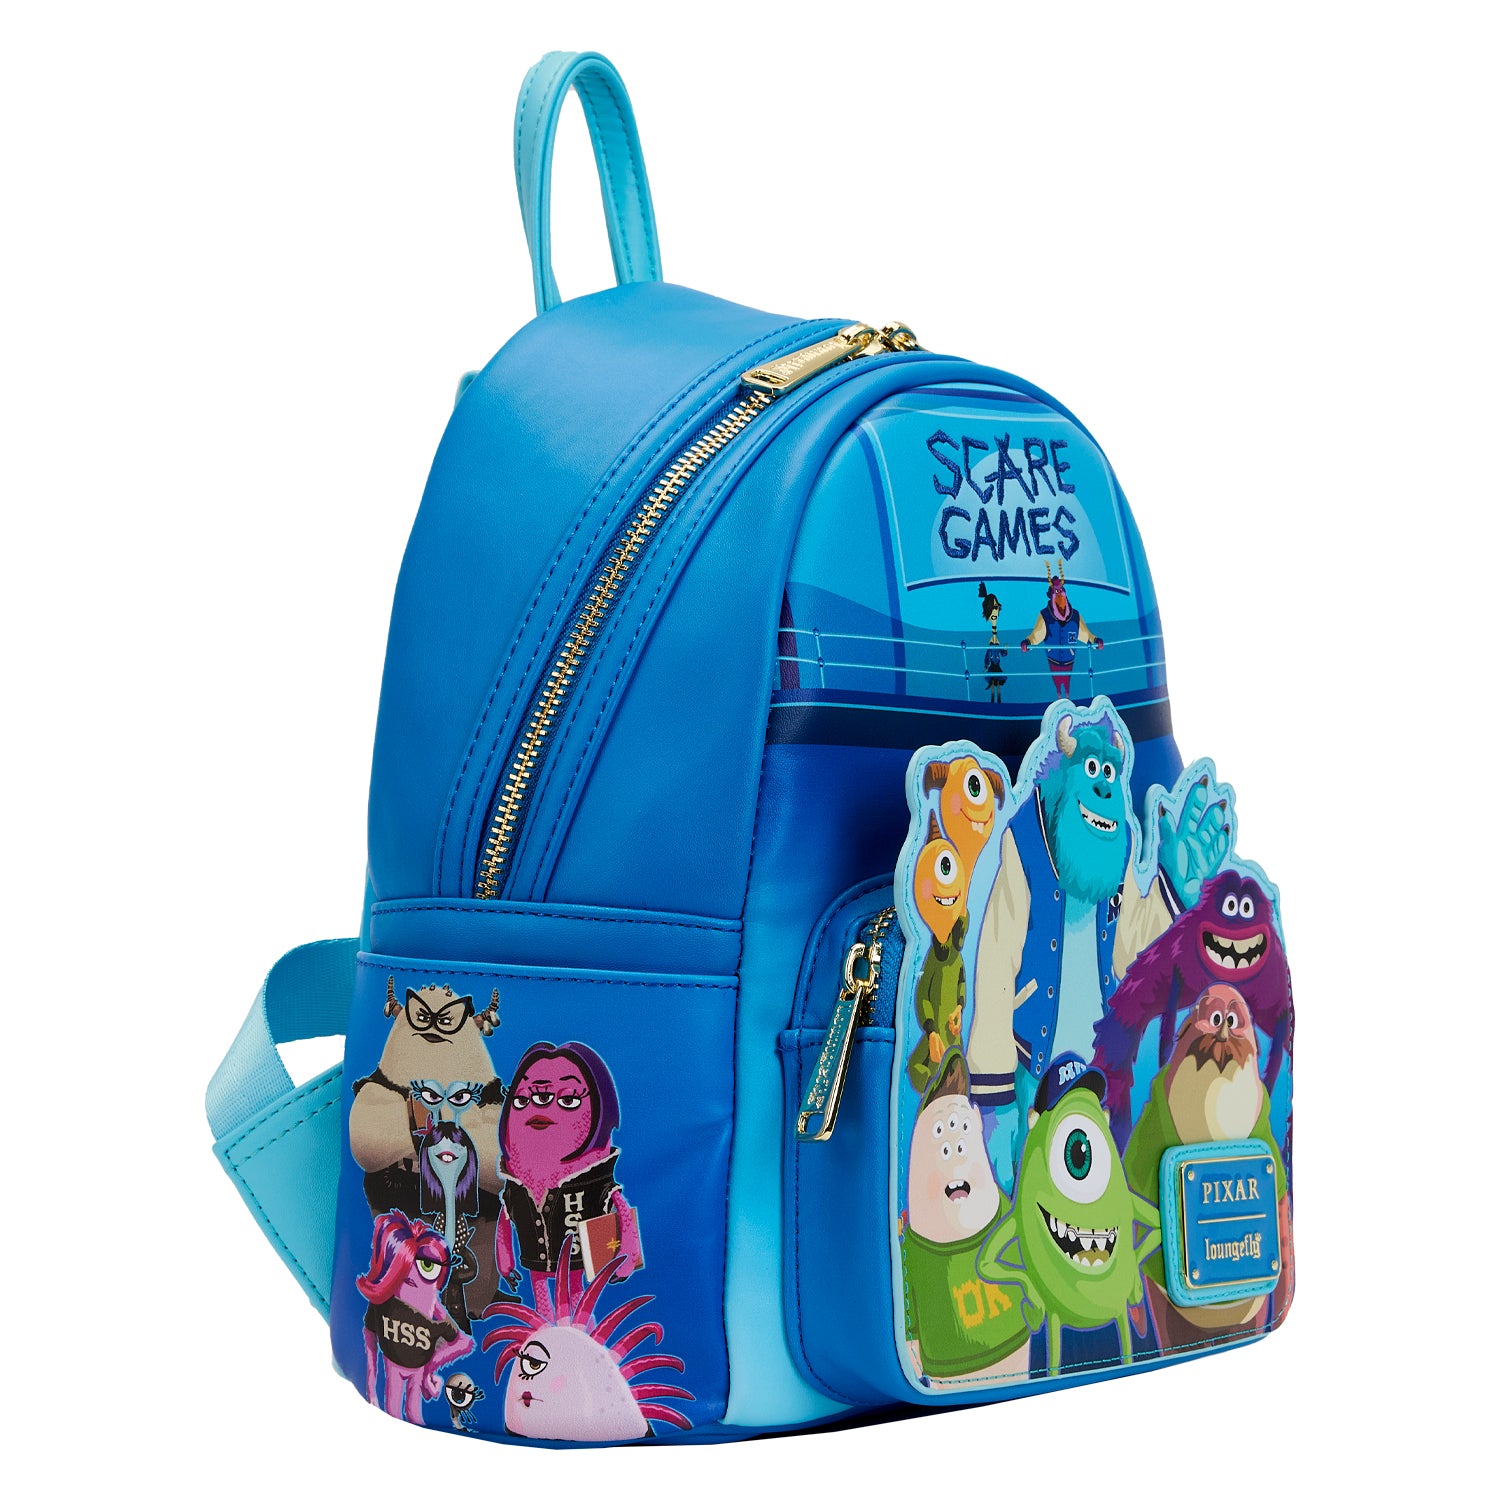 Collection Lounge Exclusive LF Monsters Inc AOP Mini Backpack